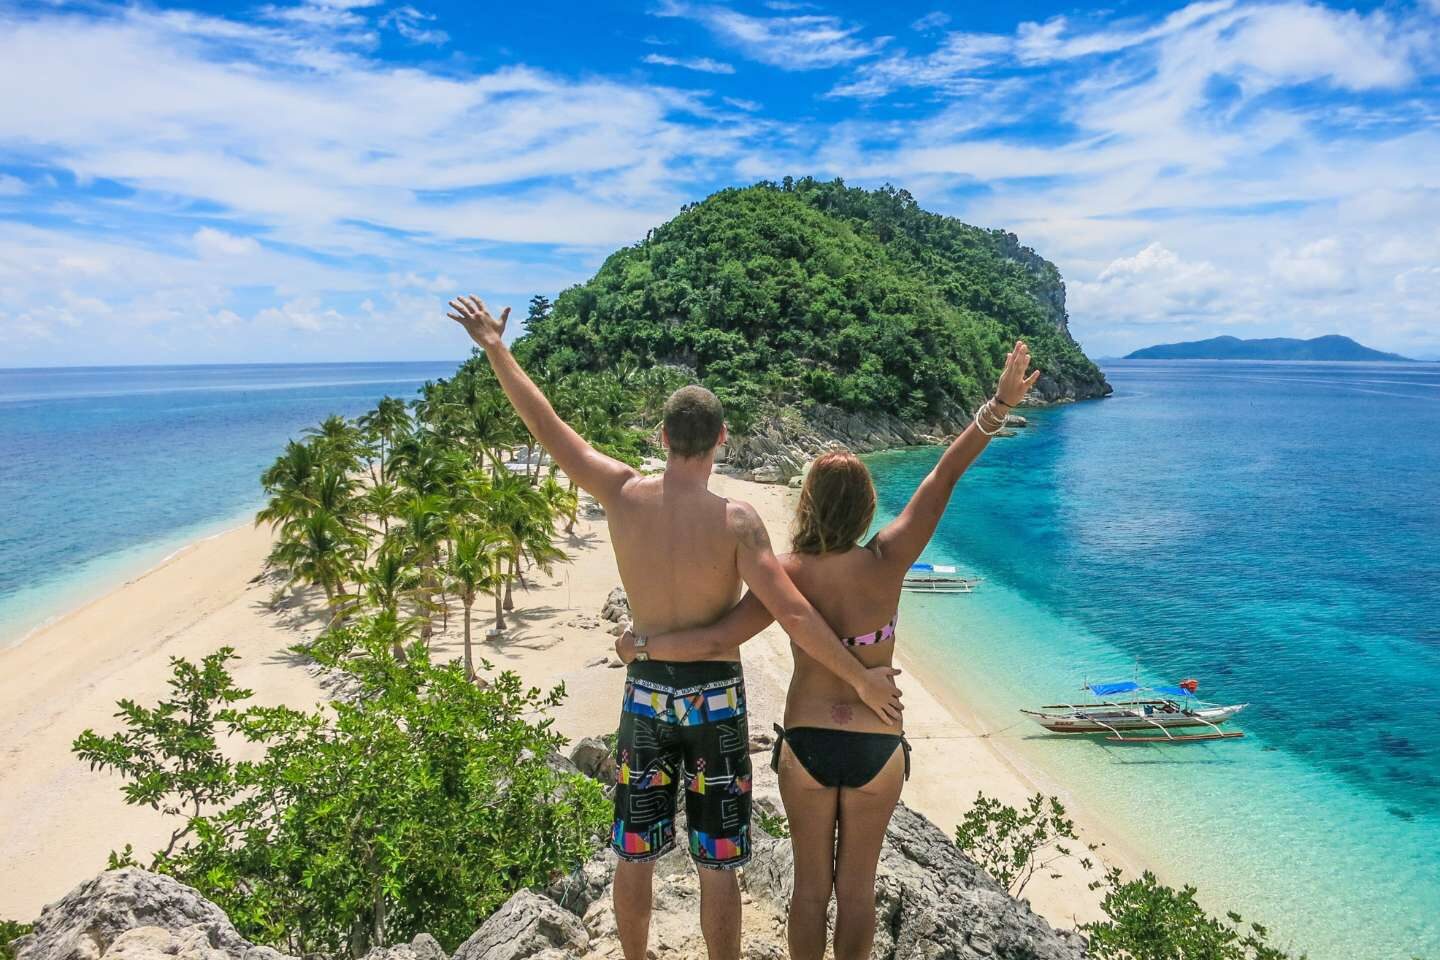 Founders of this blog enjoying the sunny weather in Gigantes Island, Philippines